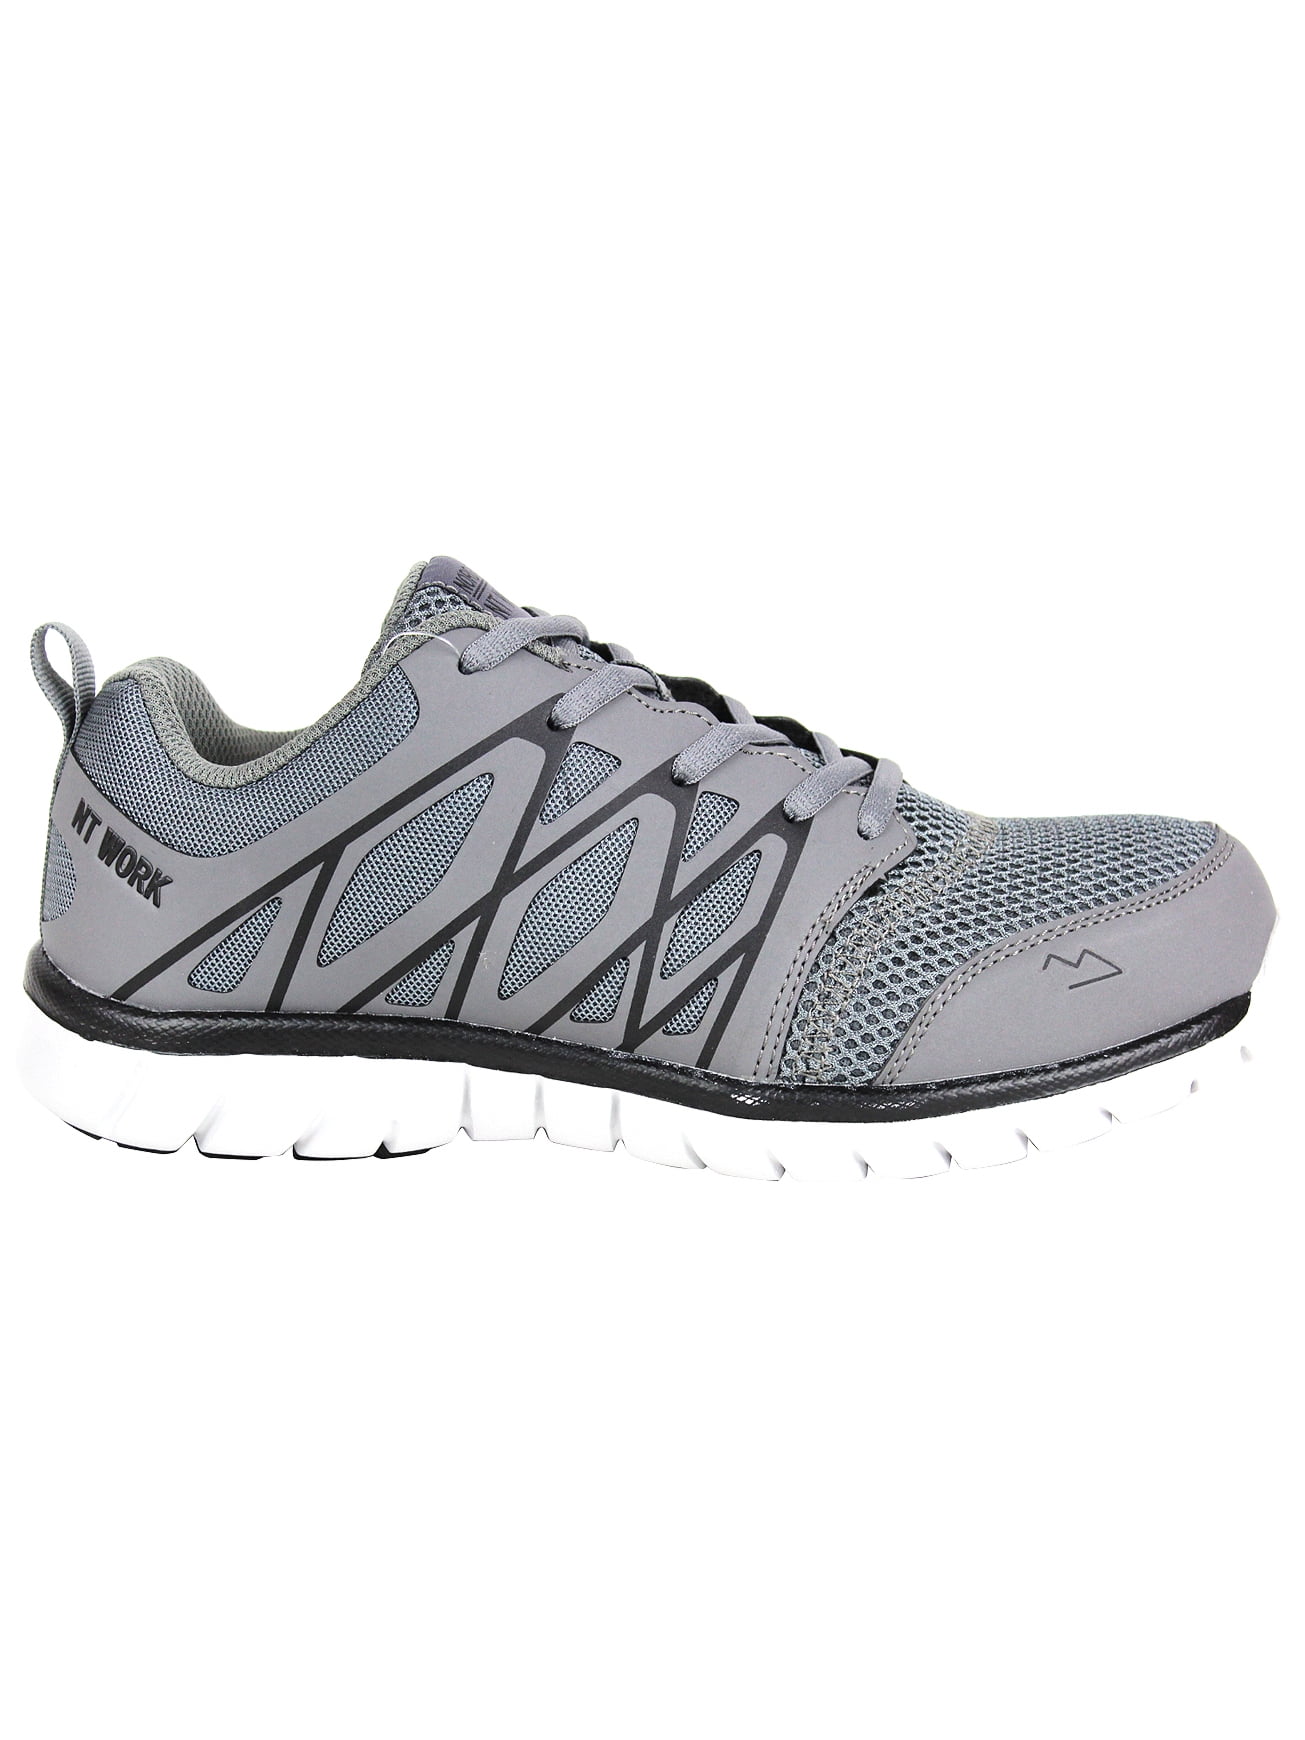 Nord Trail Vegas Womens Work Safety Shoes with Alloy Toe Charcoal Grey ...